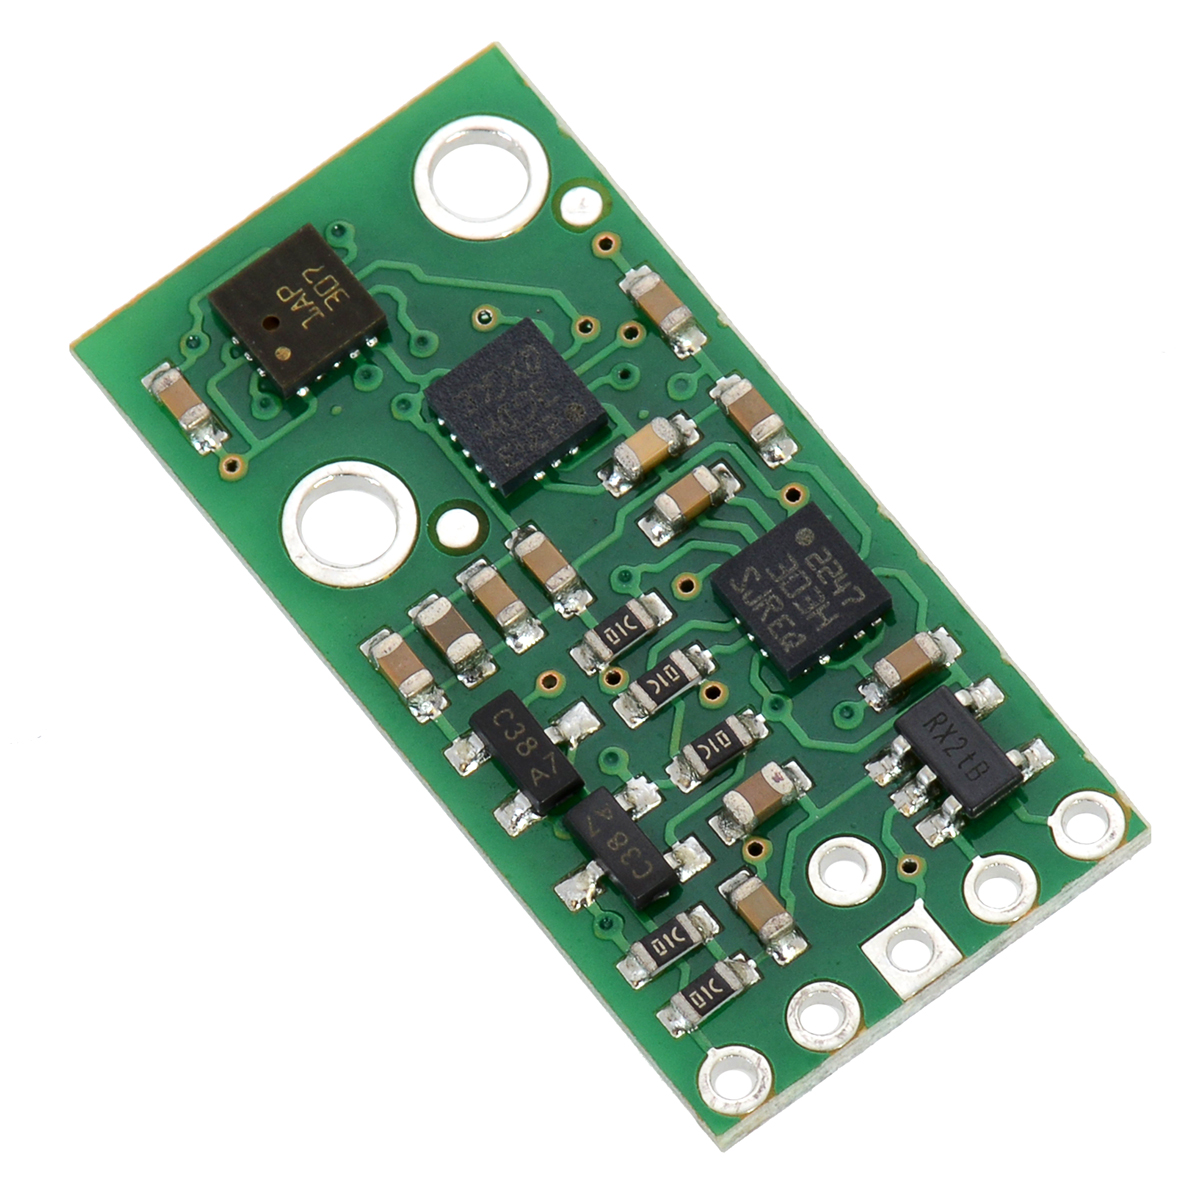 LPS25H Low Power and High-precision 10DOF IMU Breakout LSM6DS33+LIS3MDL